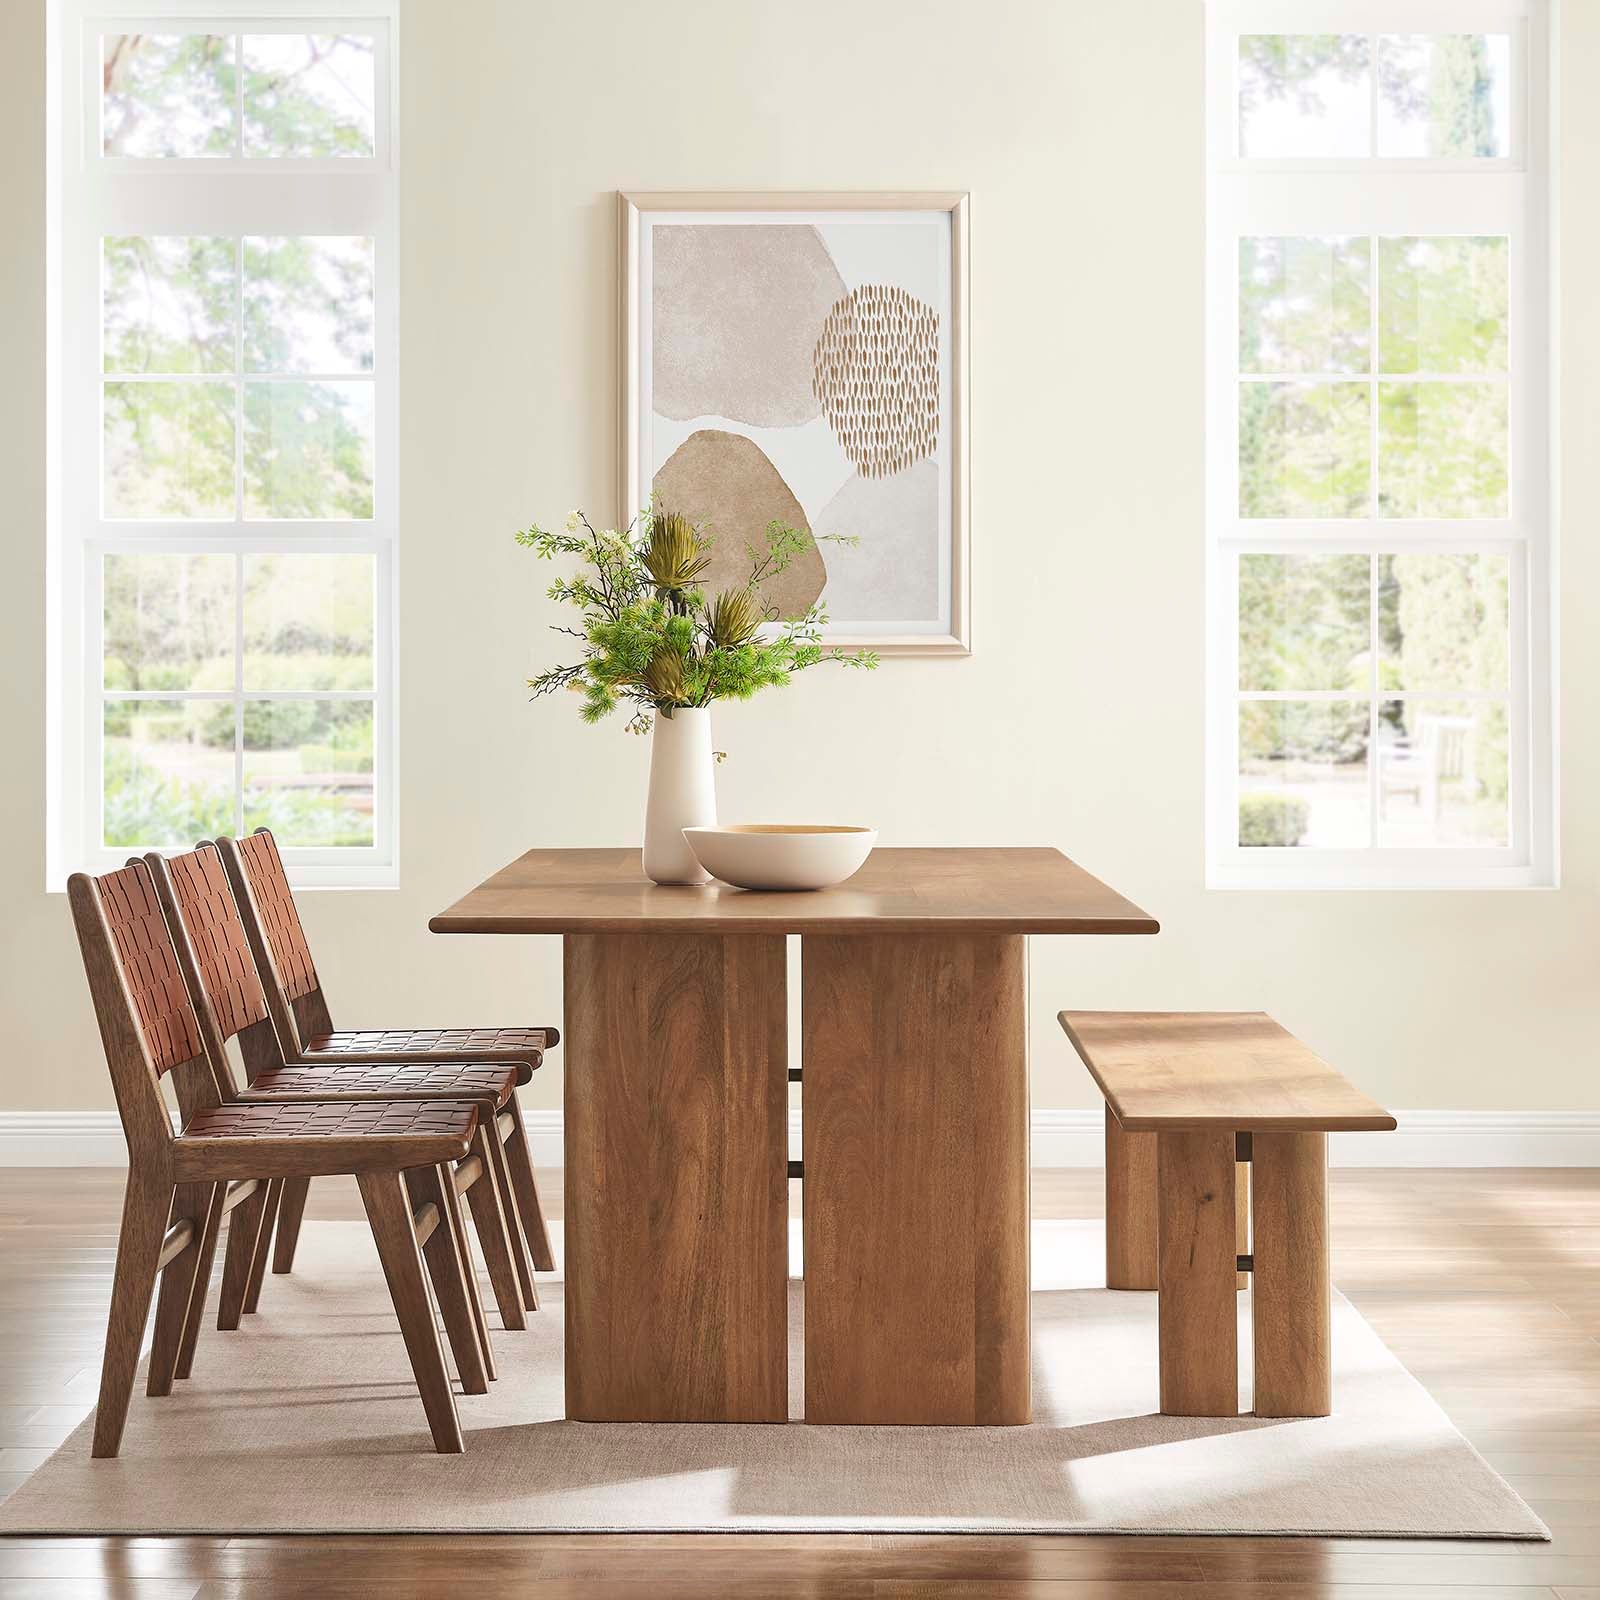 Amistad 86" Wood Dining Table and Bench Set - East Shore Modern Home Furnishings